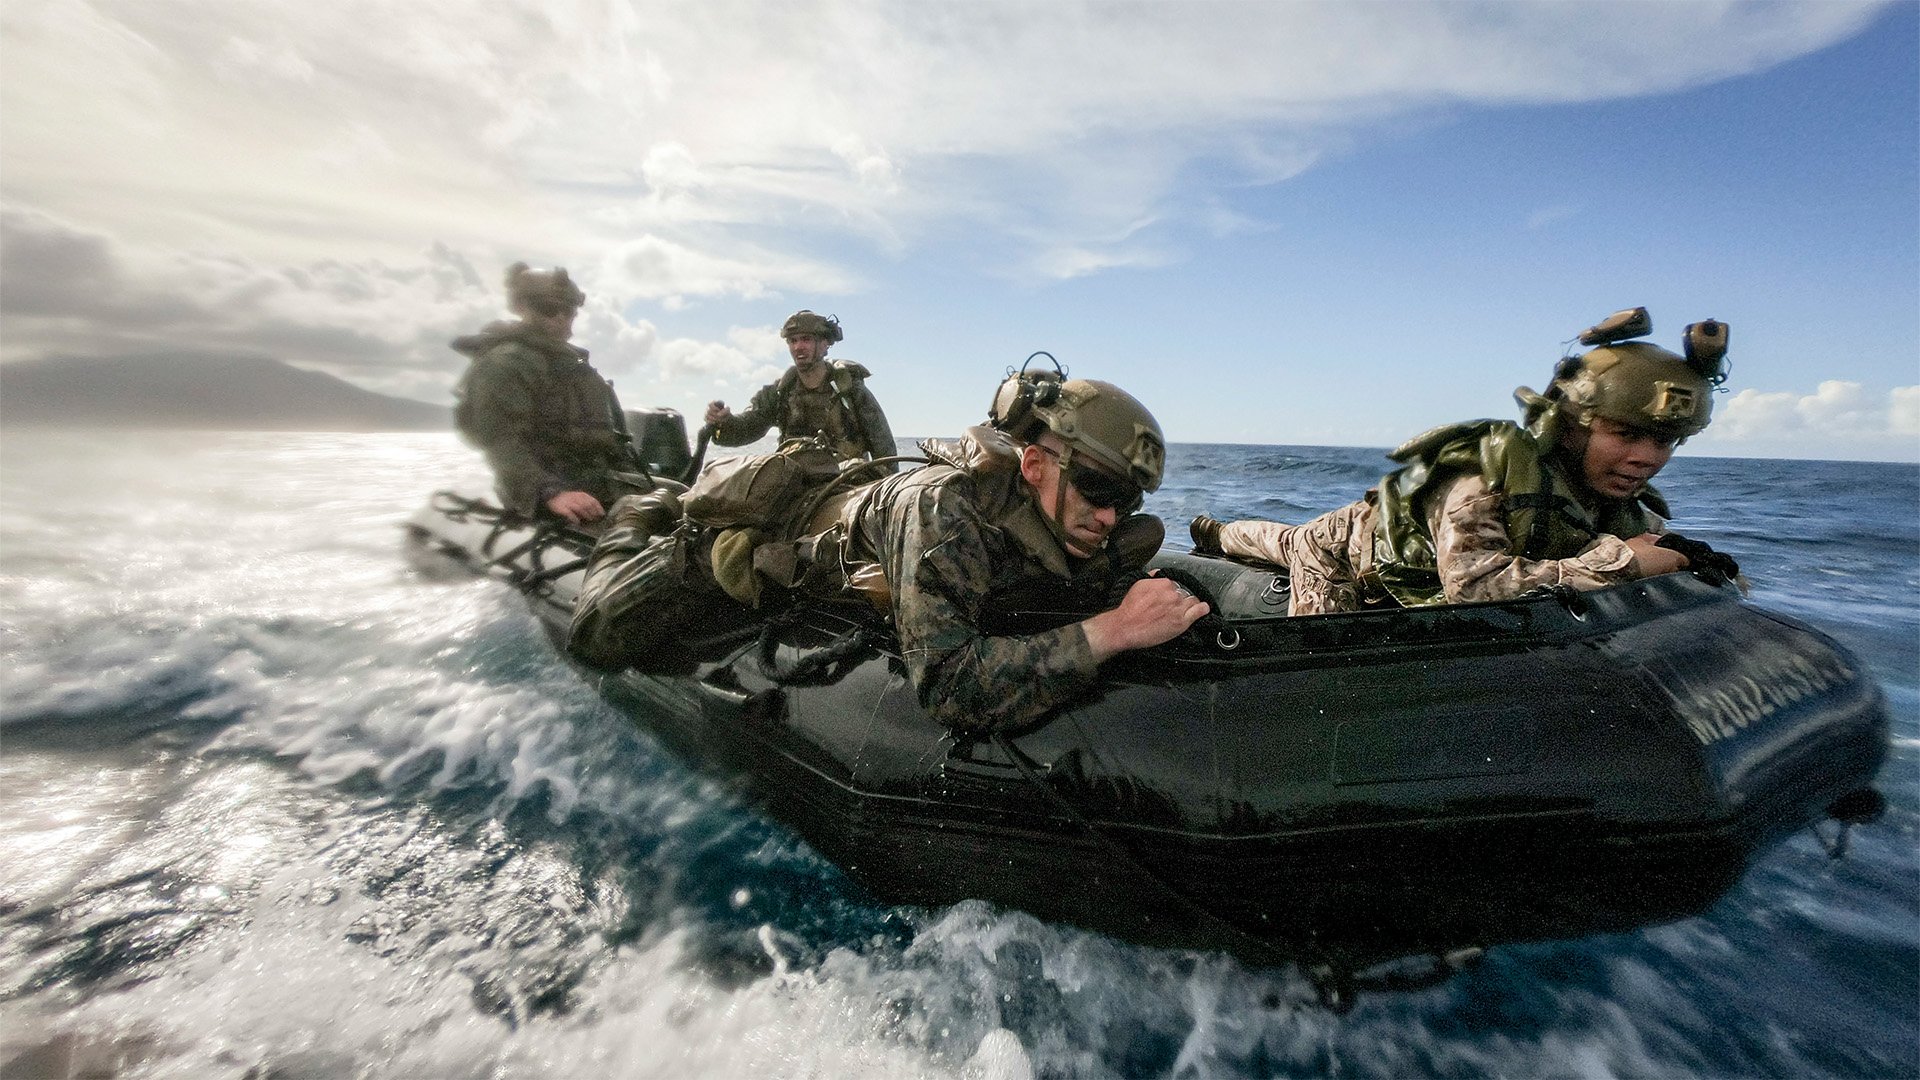 US Marines with Battalion Landing Team 2/5, 31st Marine Expeditionary Unit, practice a raid off the coast of Claveria, Philippines, on Oct. 3, 2022. The training was a part of KAMANDAG, an annual exercise by the US military and the armed forces of the Philioppines. US Marine Corps photo by Sgt. Danny Gonzalez.